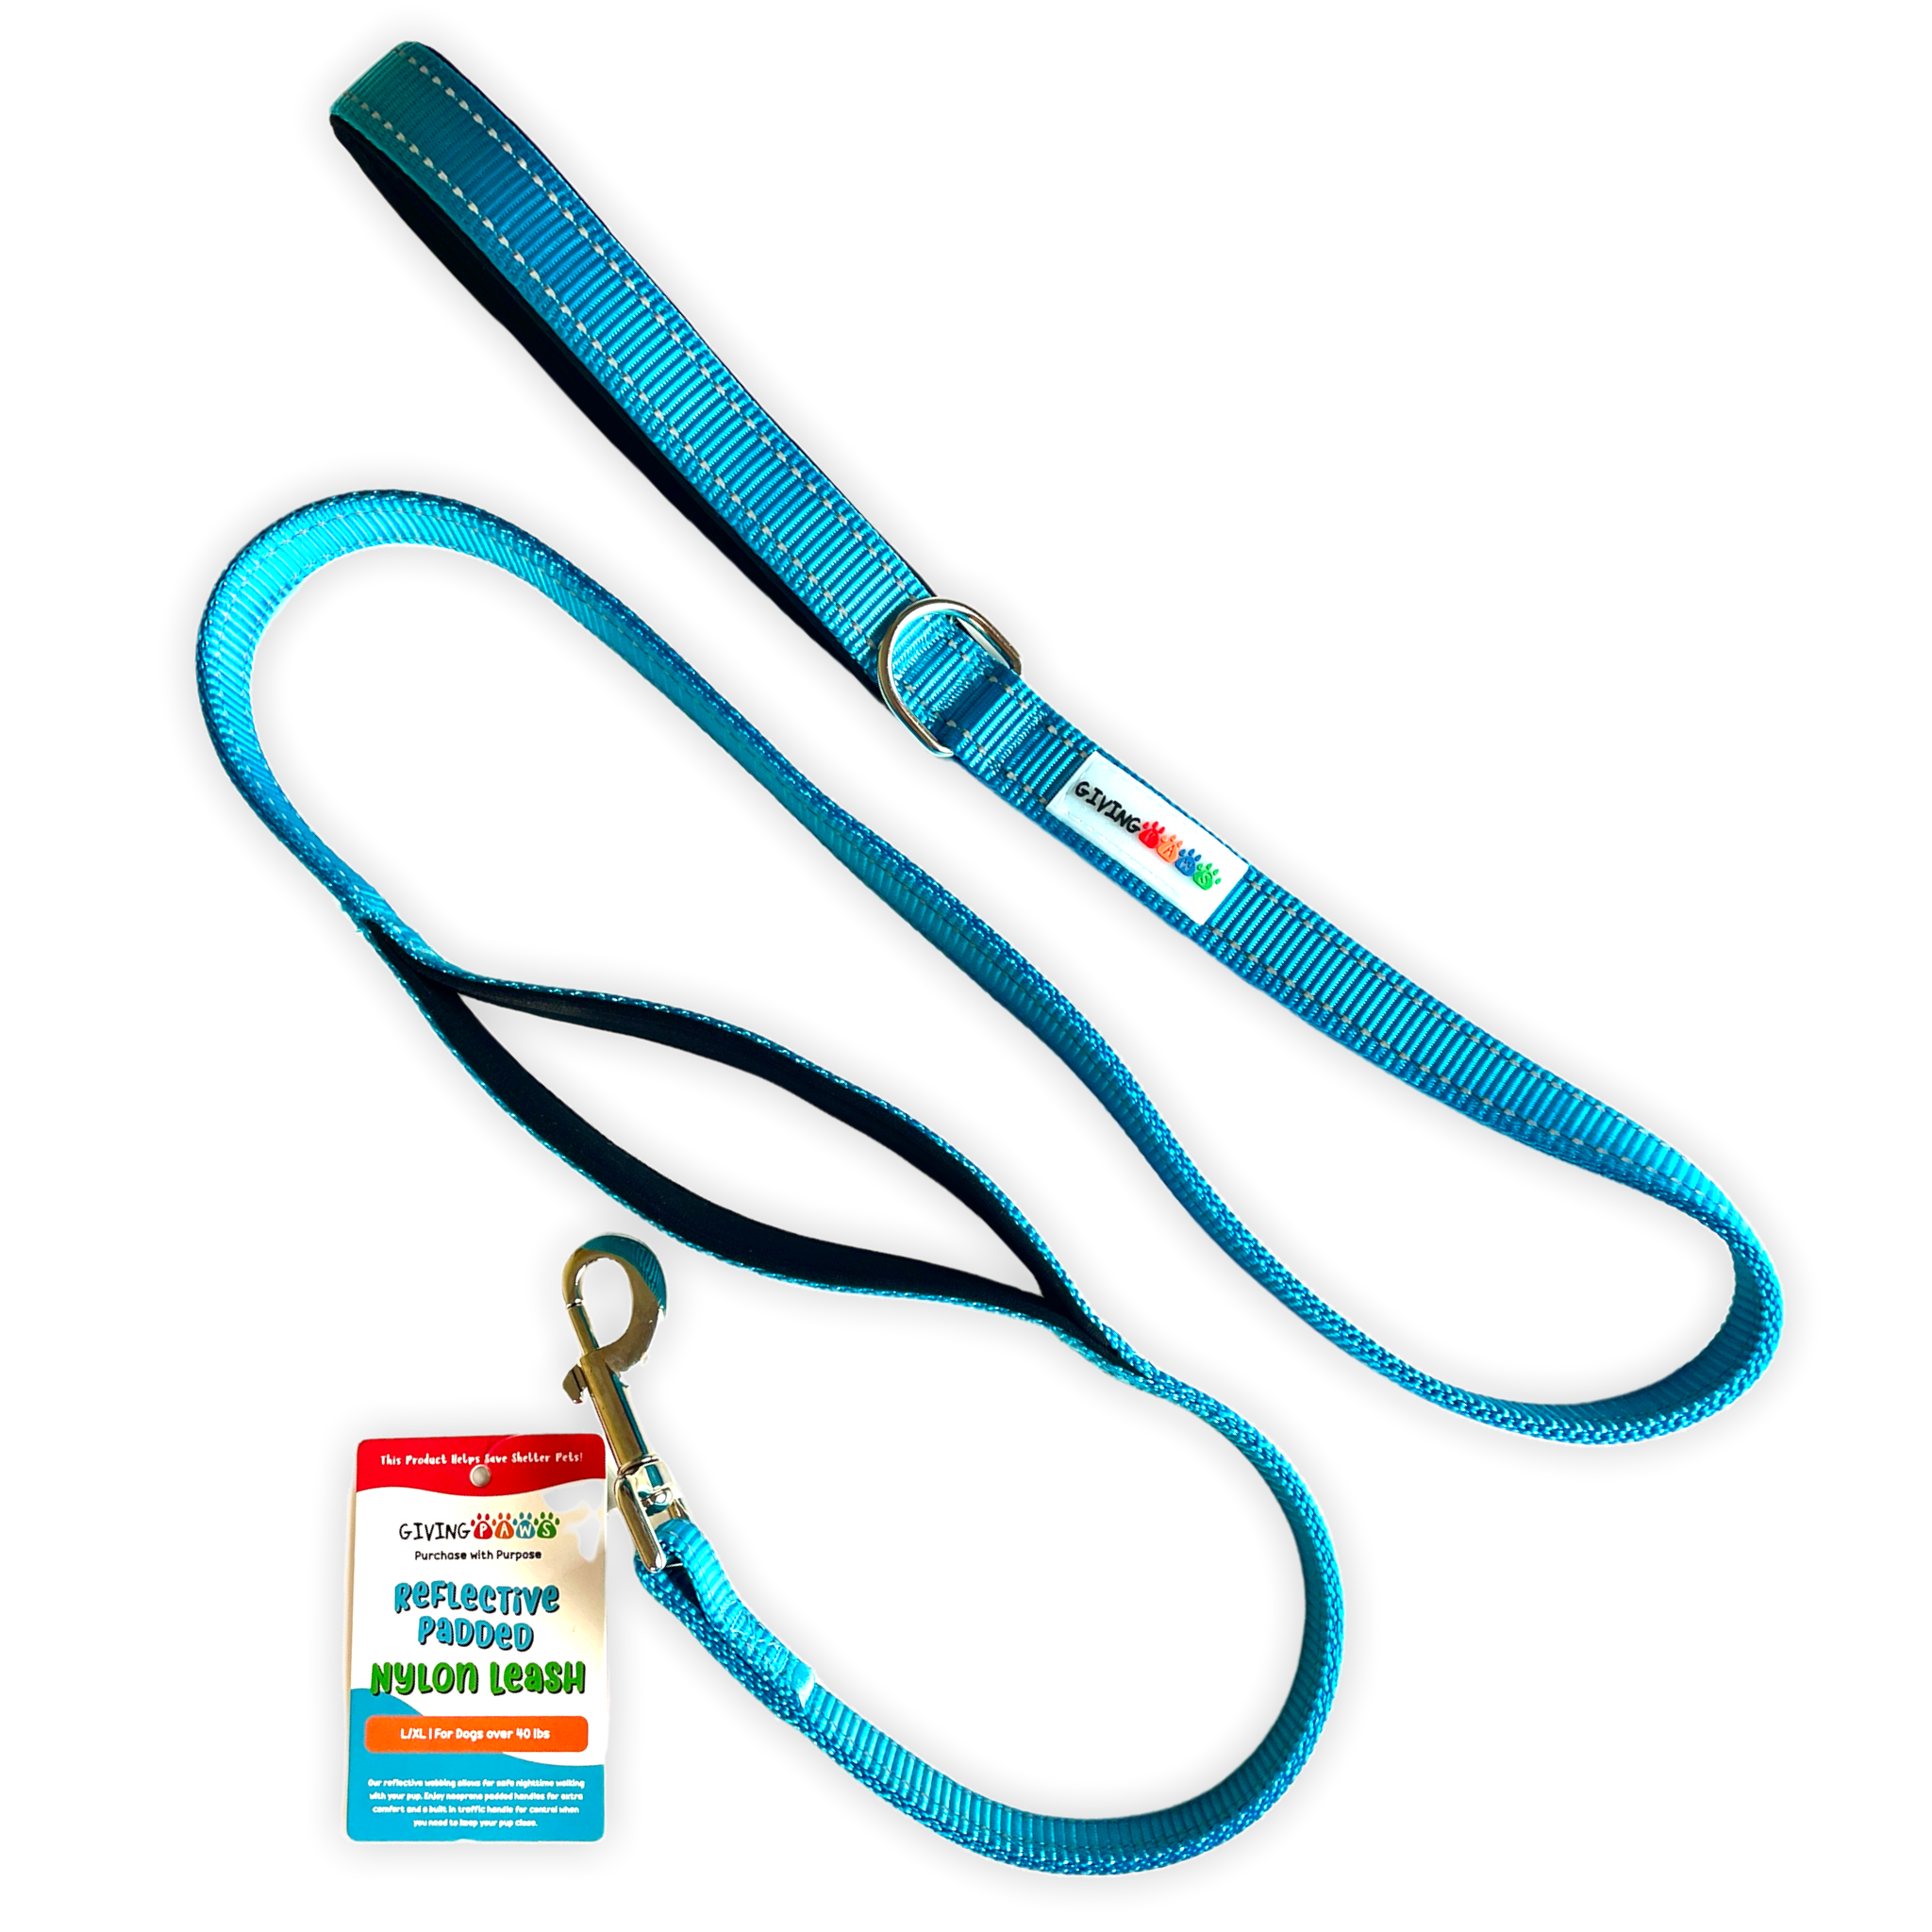 Reflective Nylon Leash with Padded Traffic Handle (5ft)